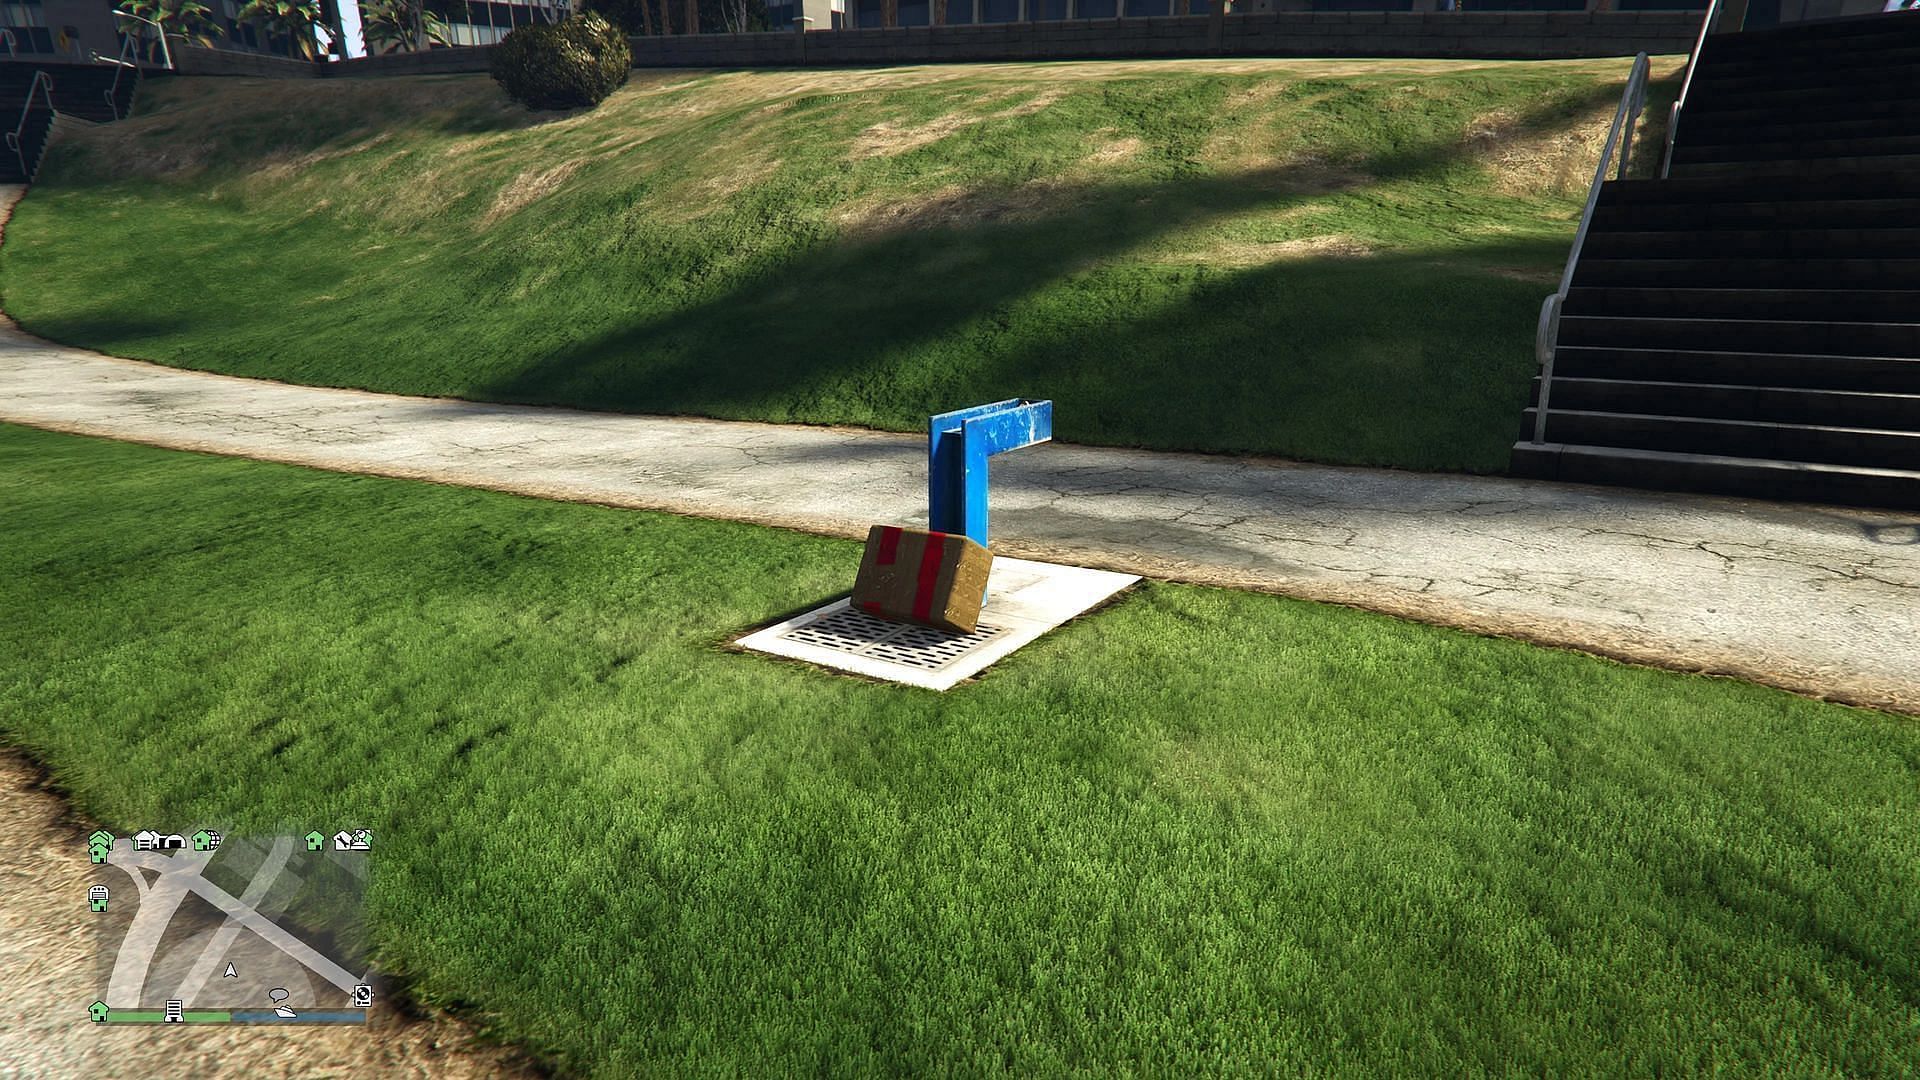 G's Cache box dropped off at a location (Image via GTA Wiki)